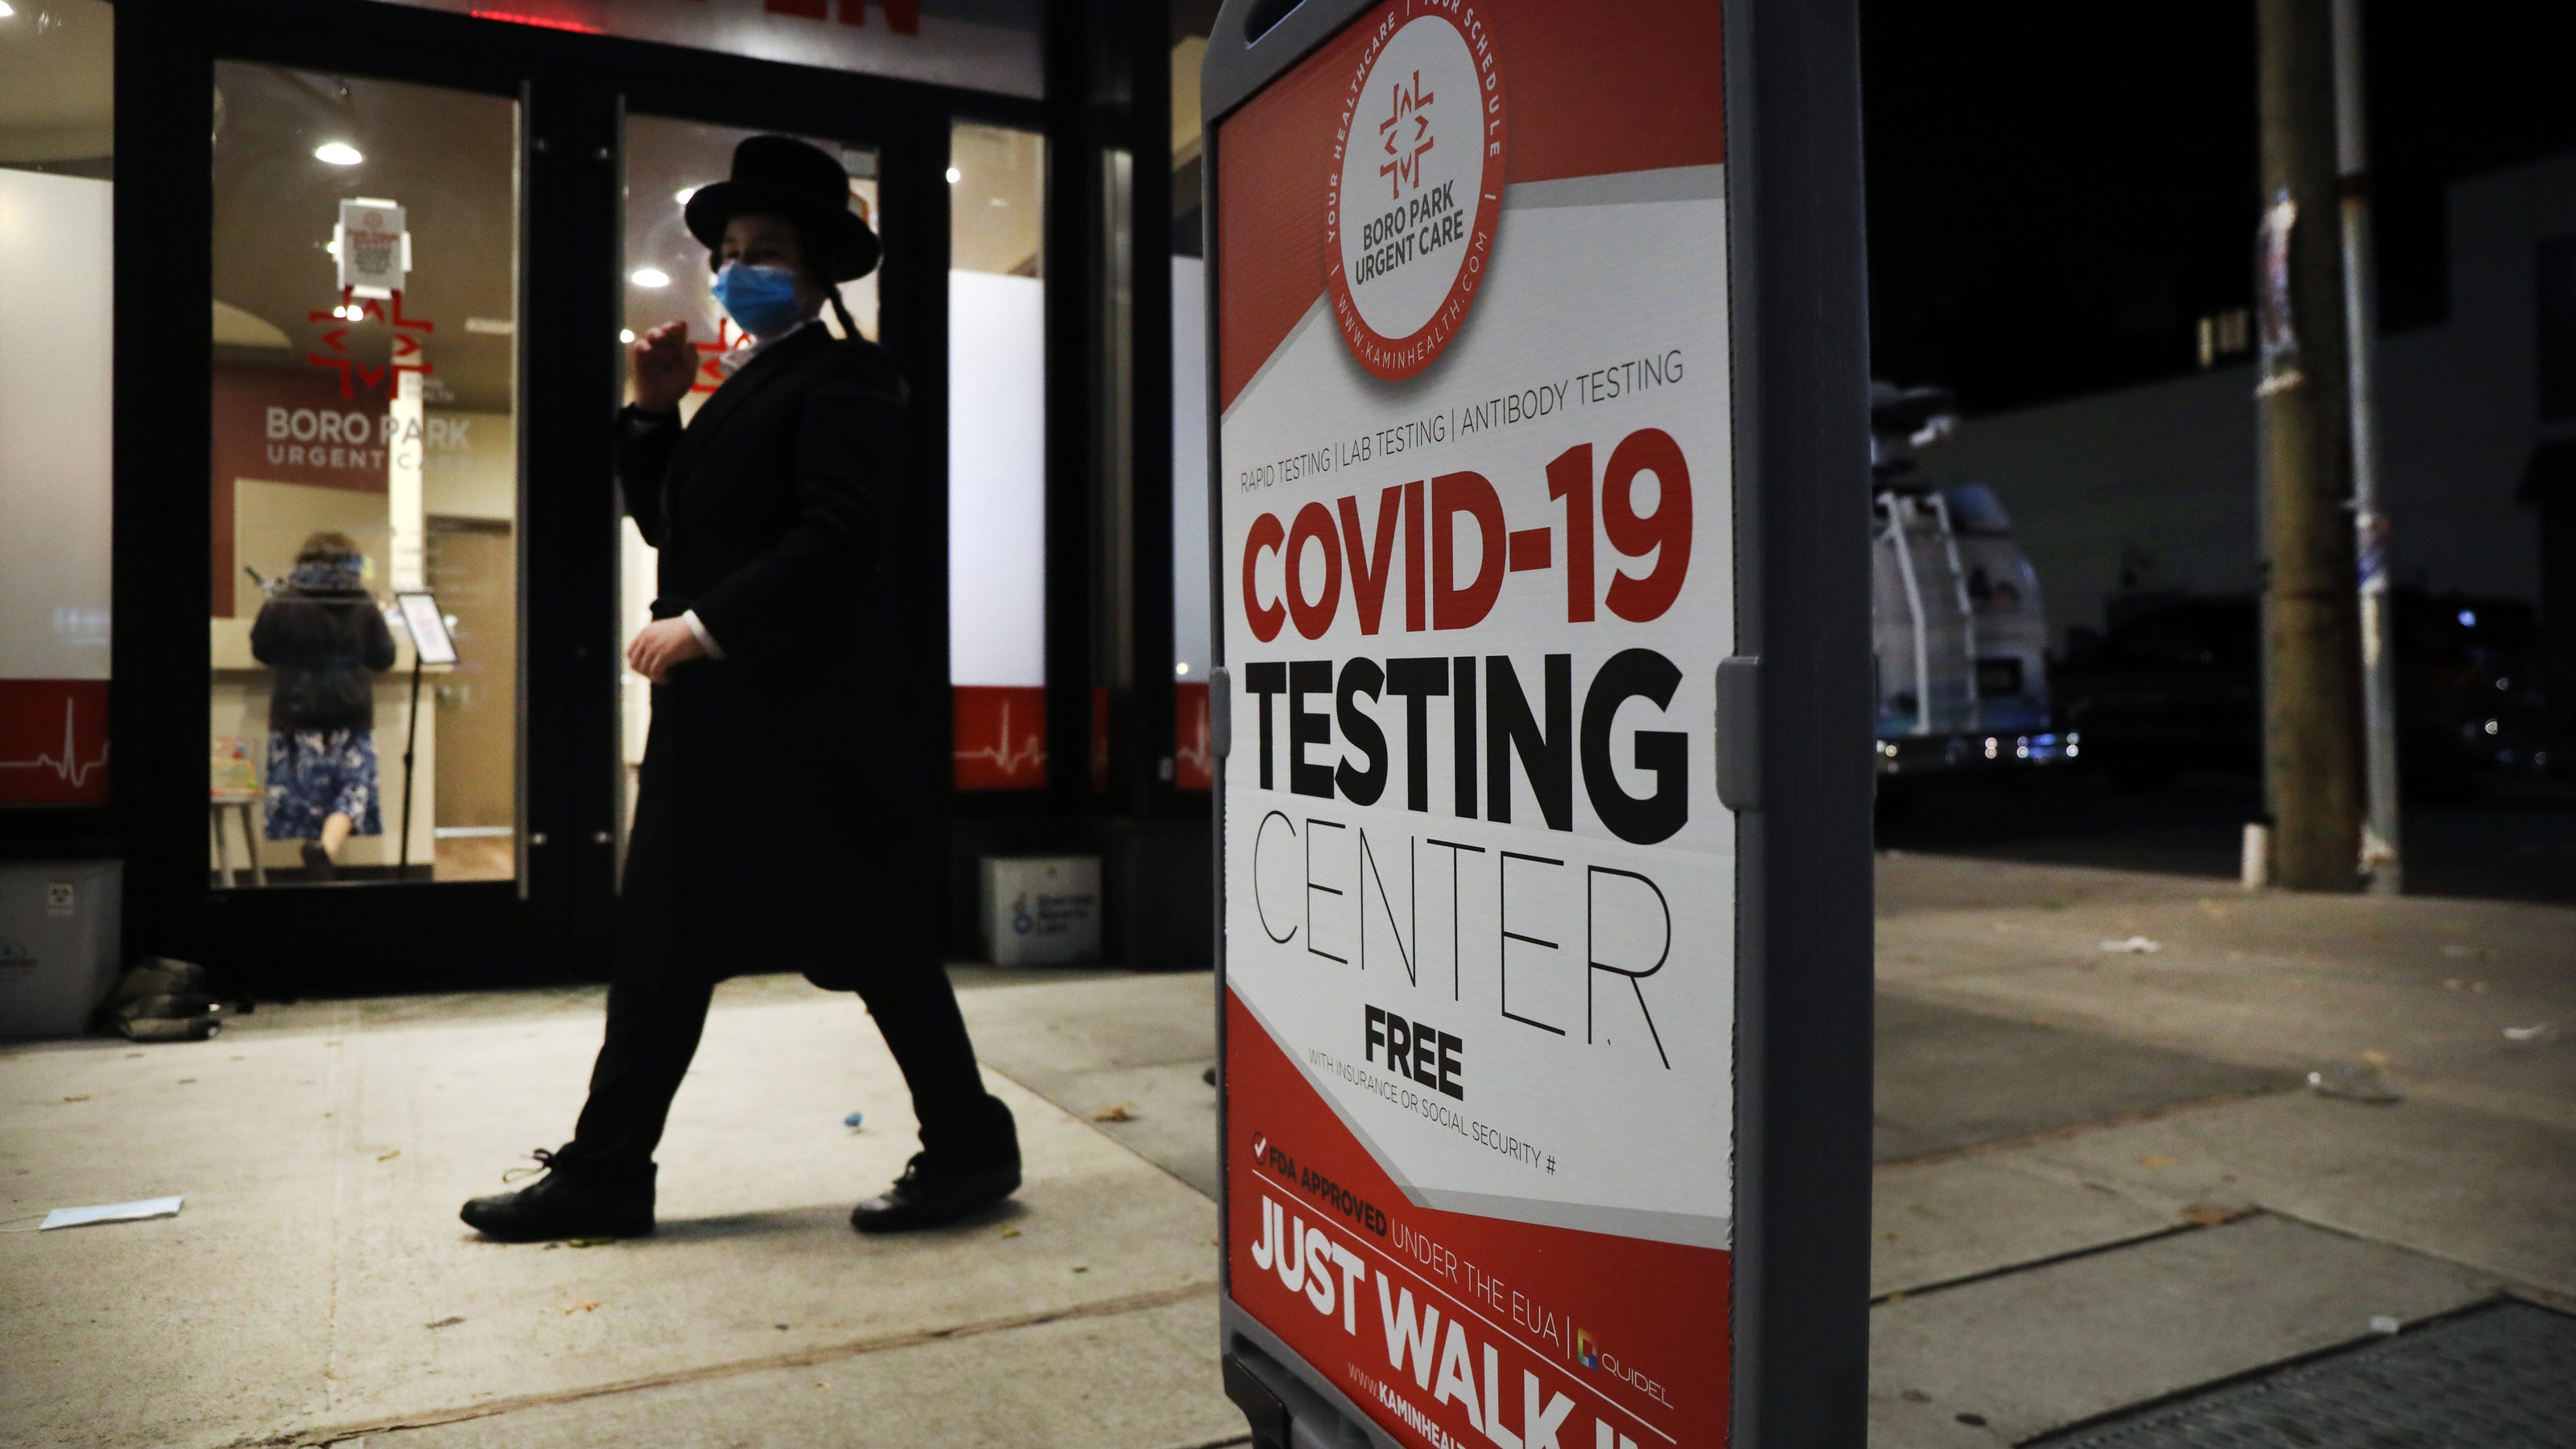 Home COVID tests are convenient, safe and key to an economic restart